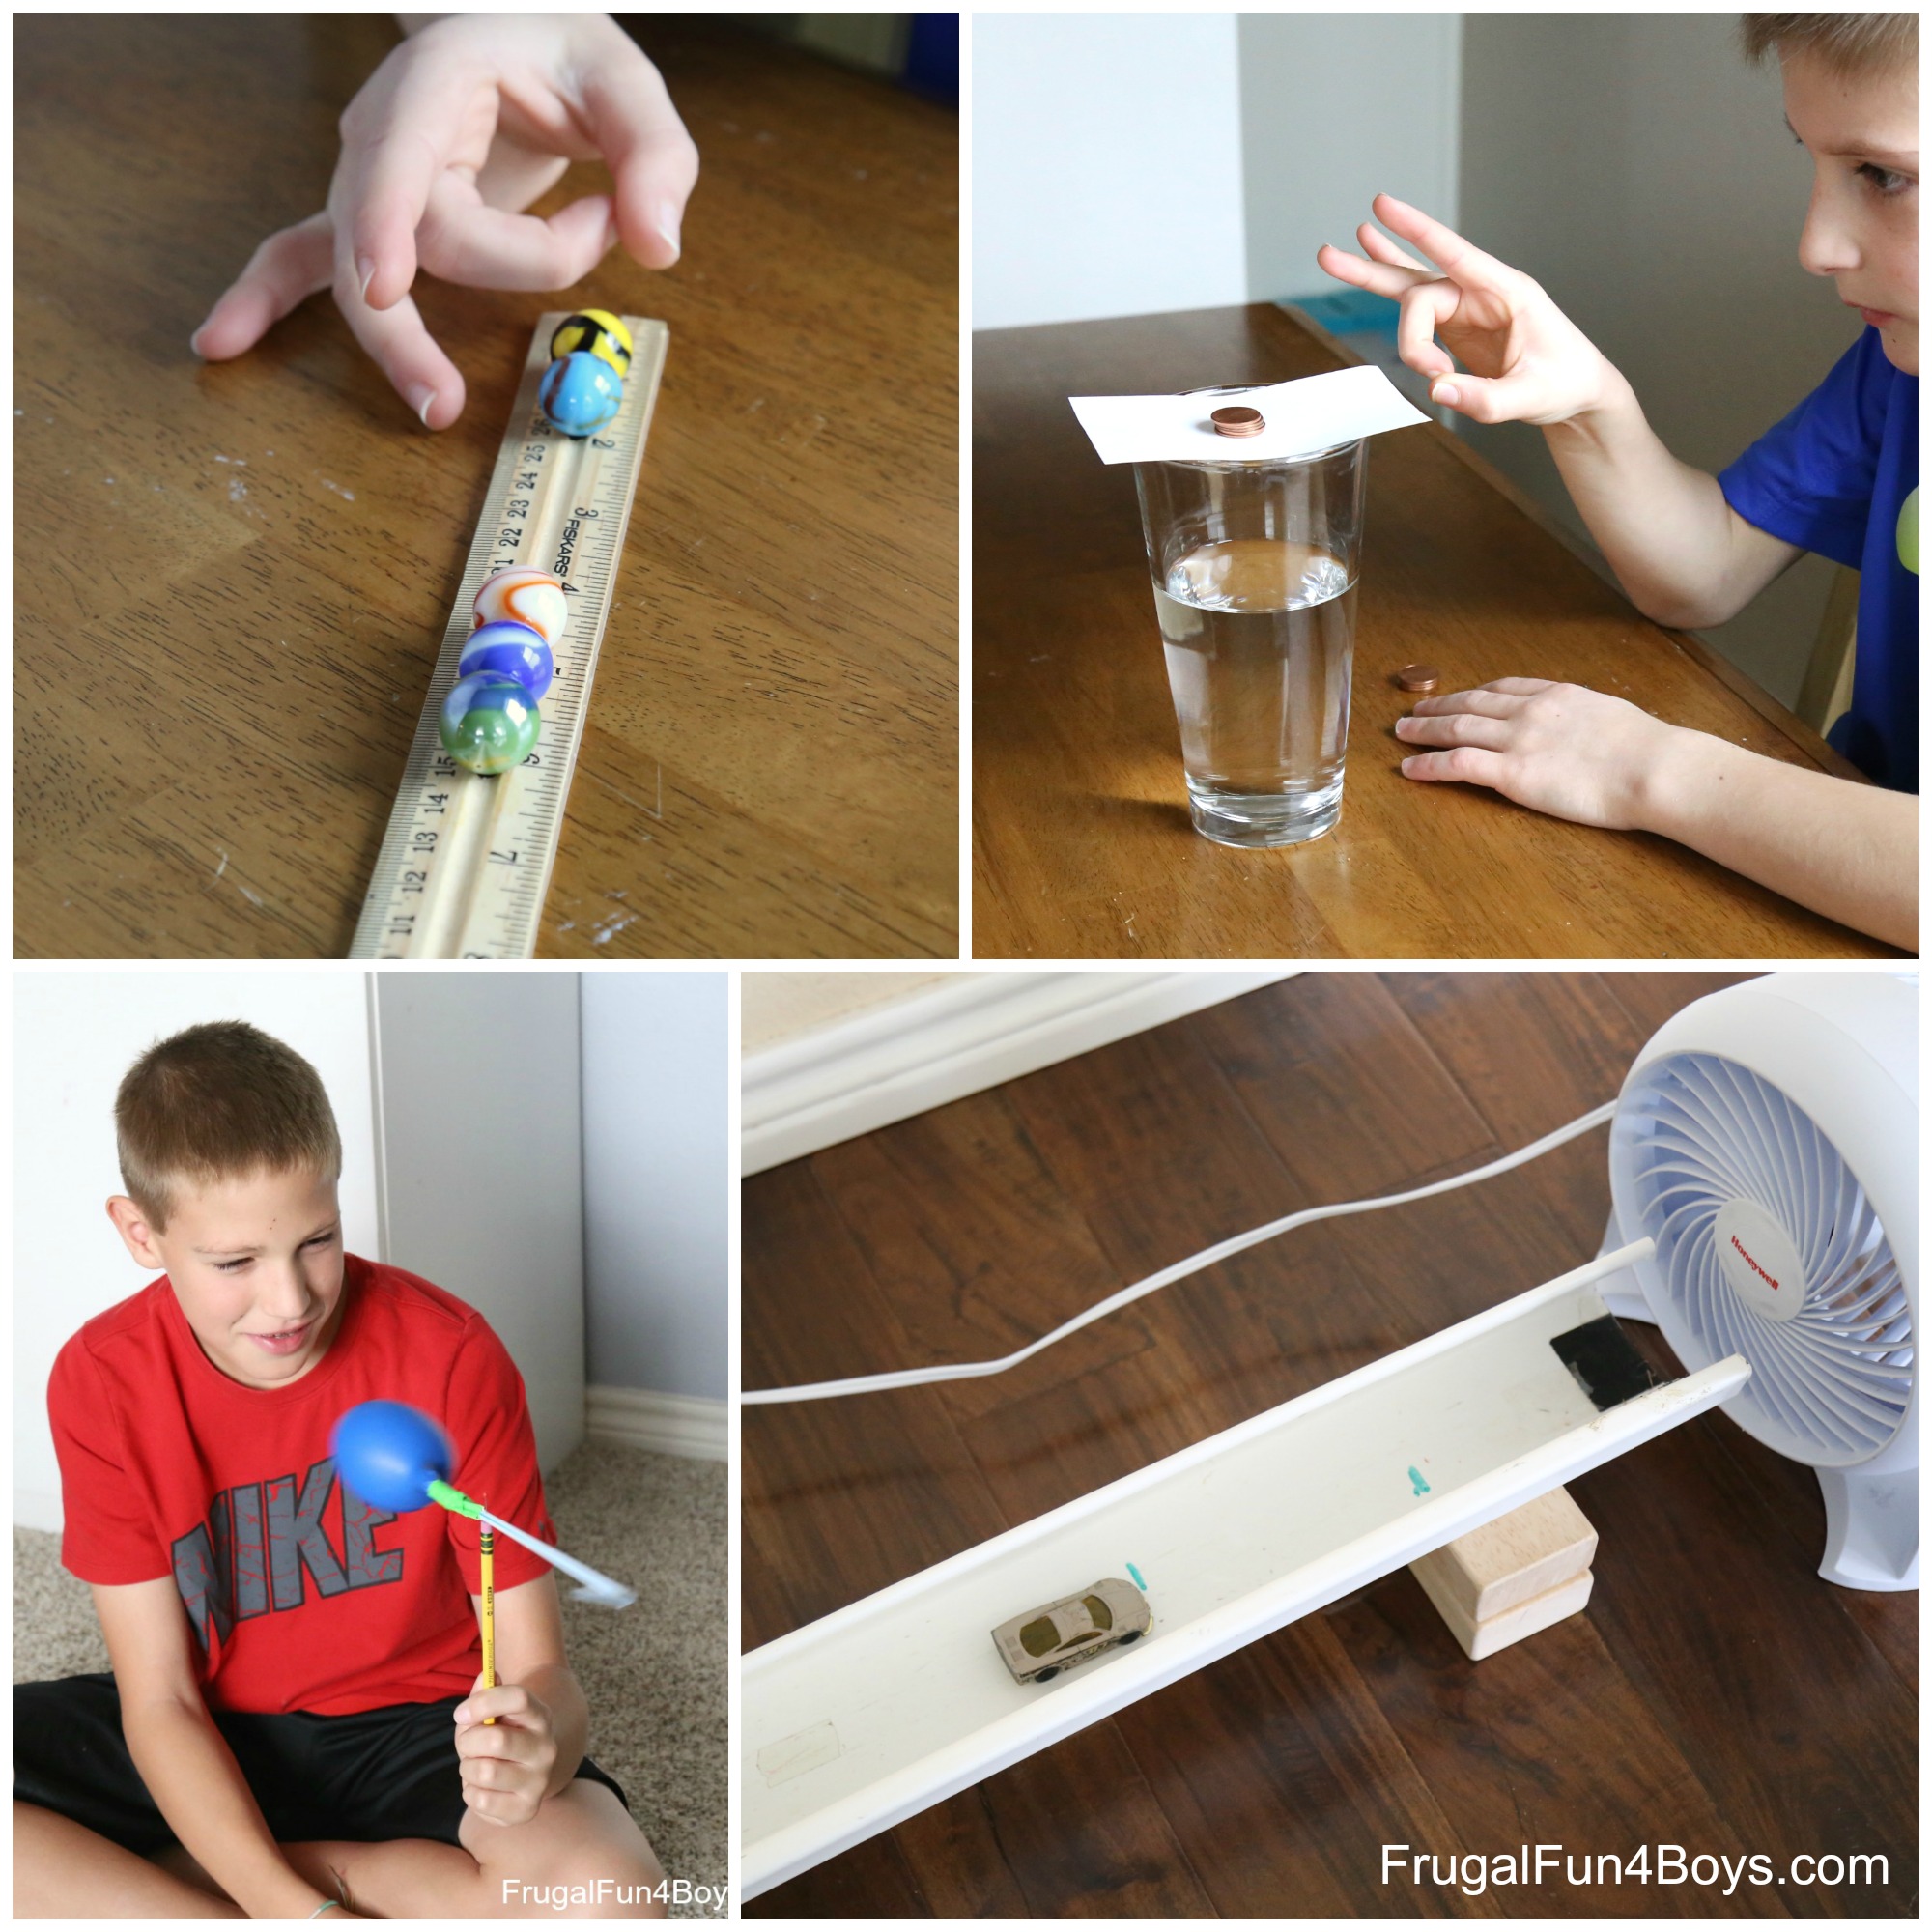 physics experiments that can be done at home